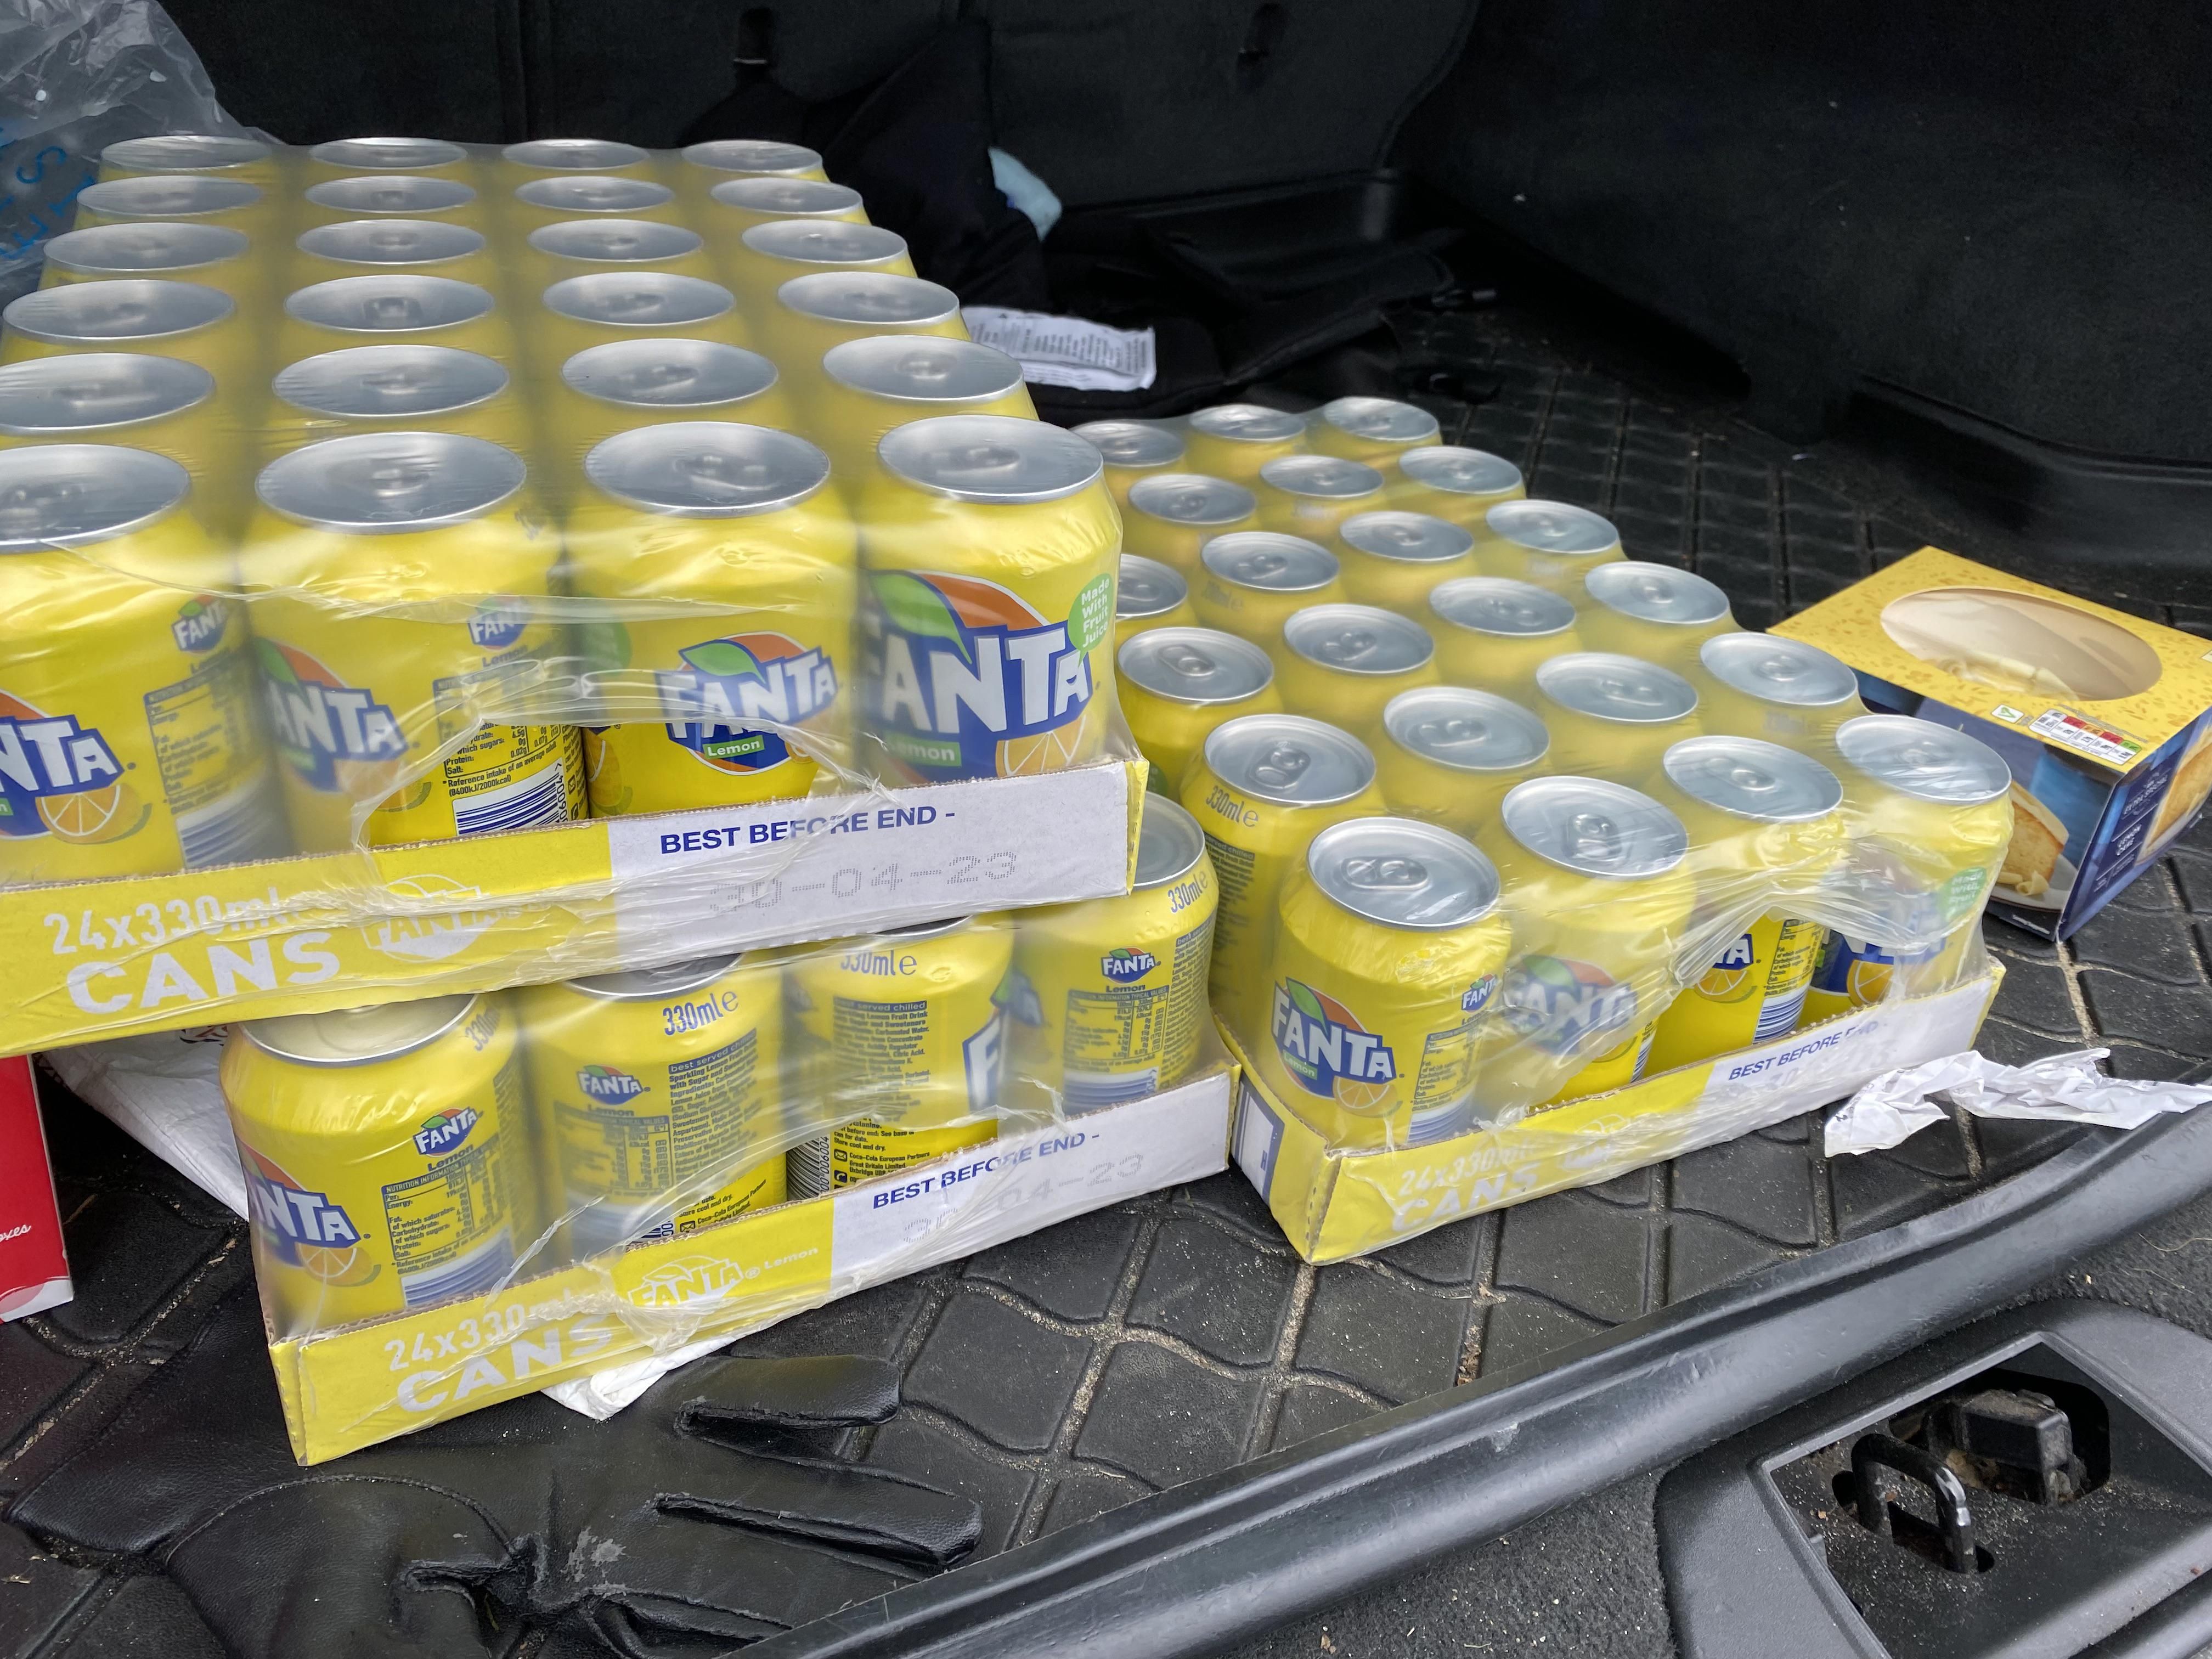 Apparently Fanta Lemon is such a rarity in the UK that when my wife sees a multipack of it, she buys 72 cans!